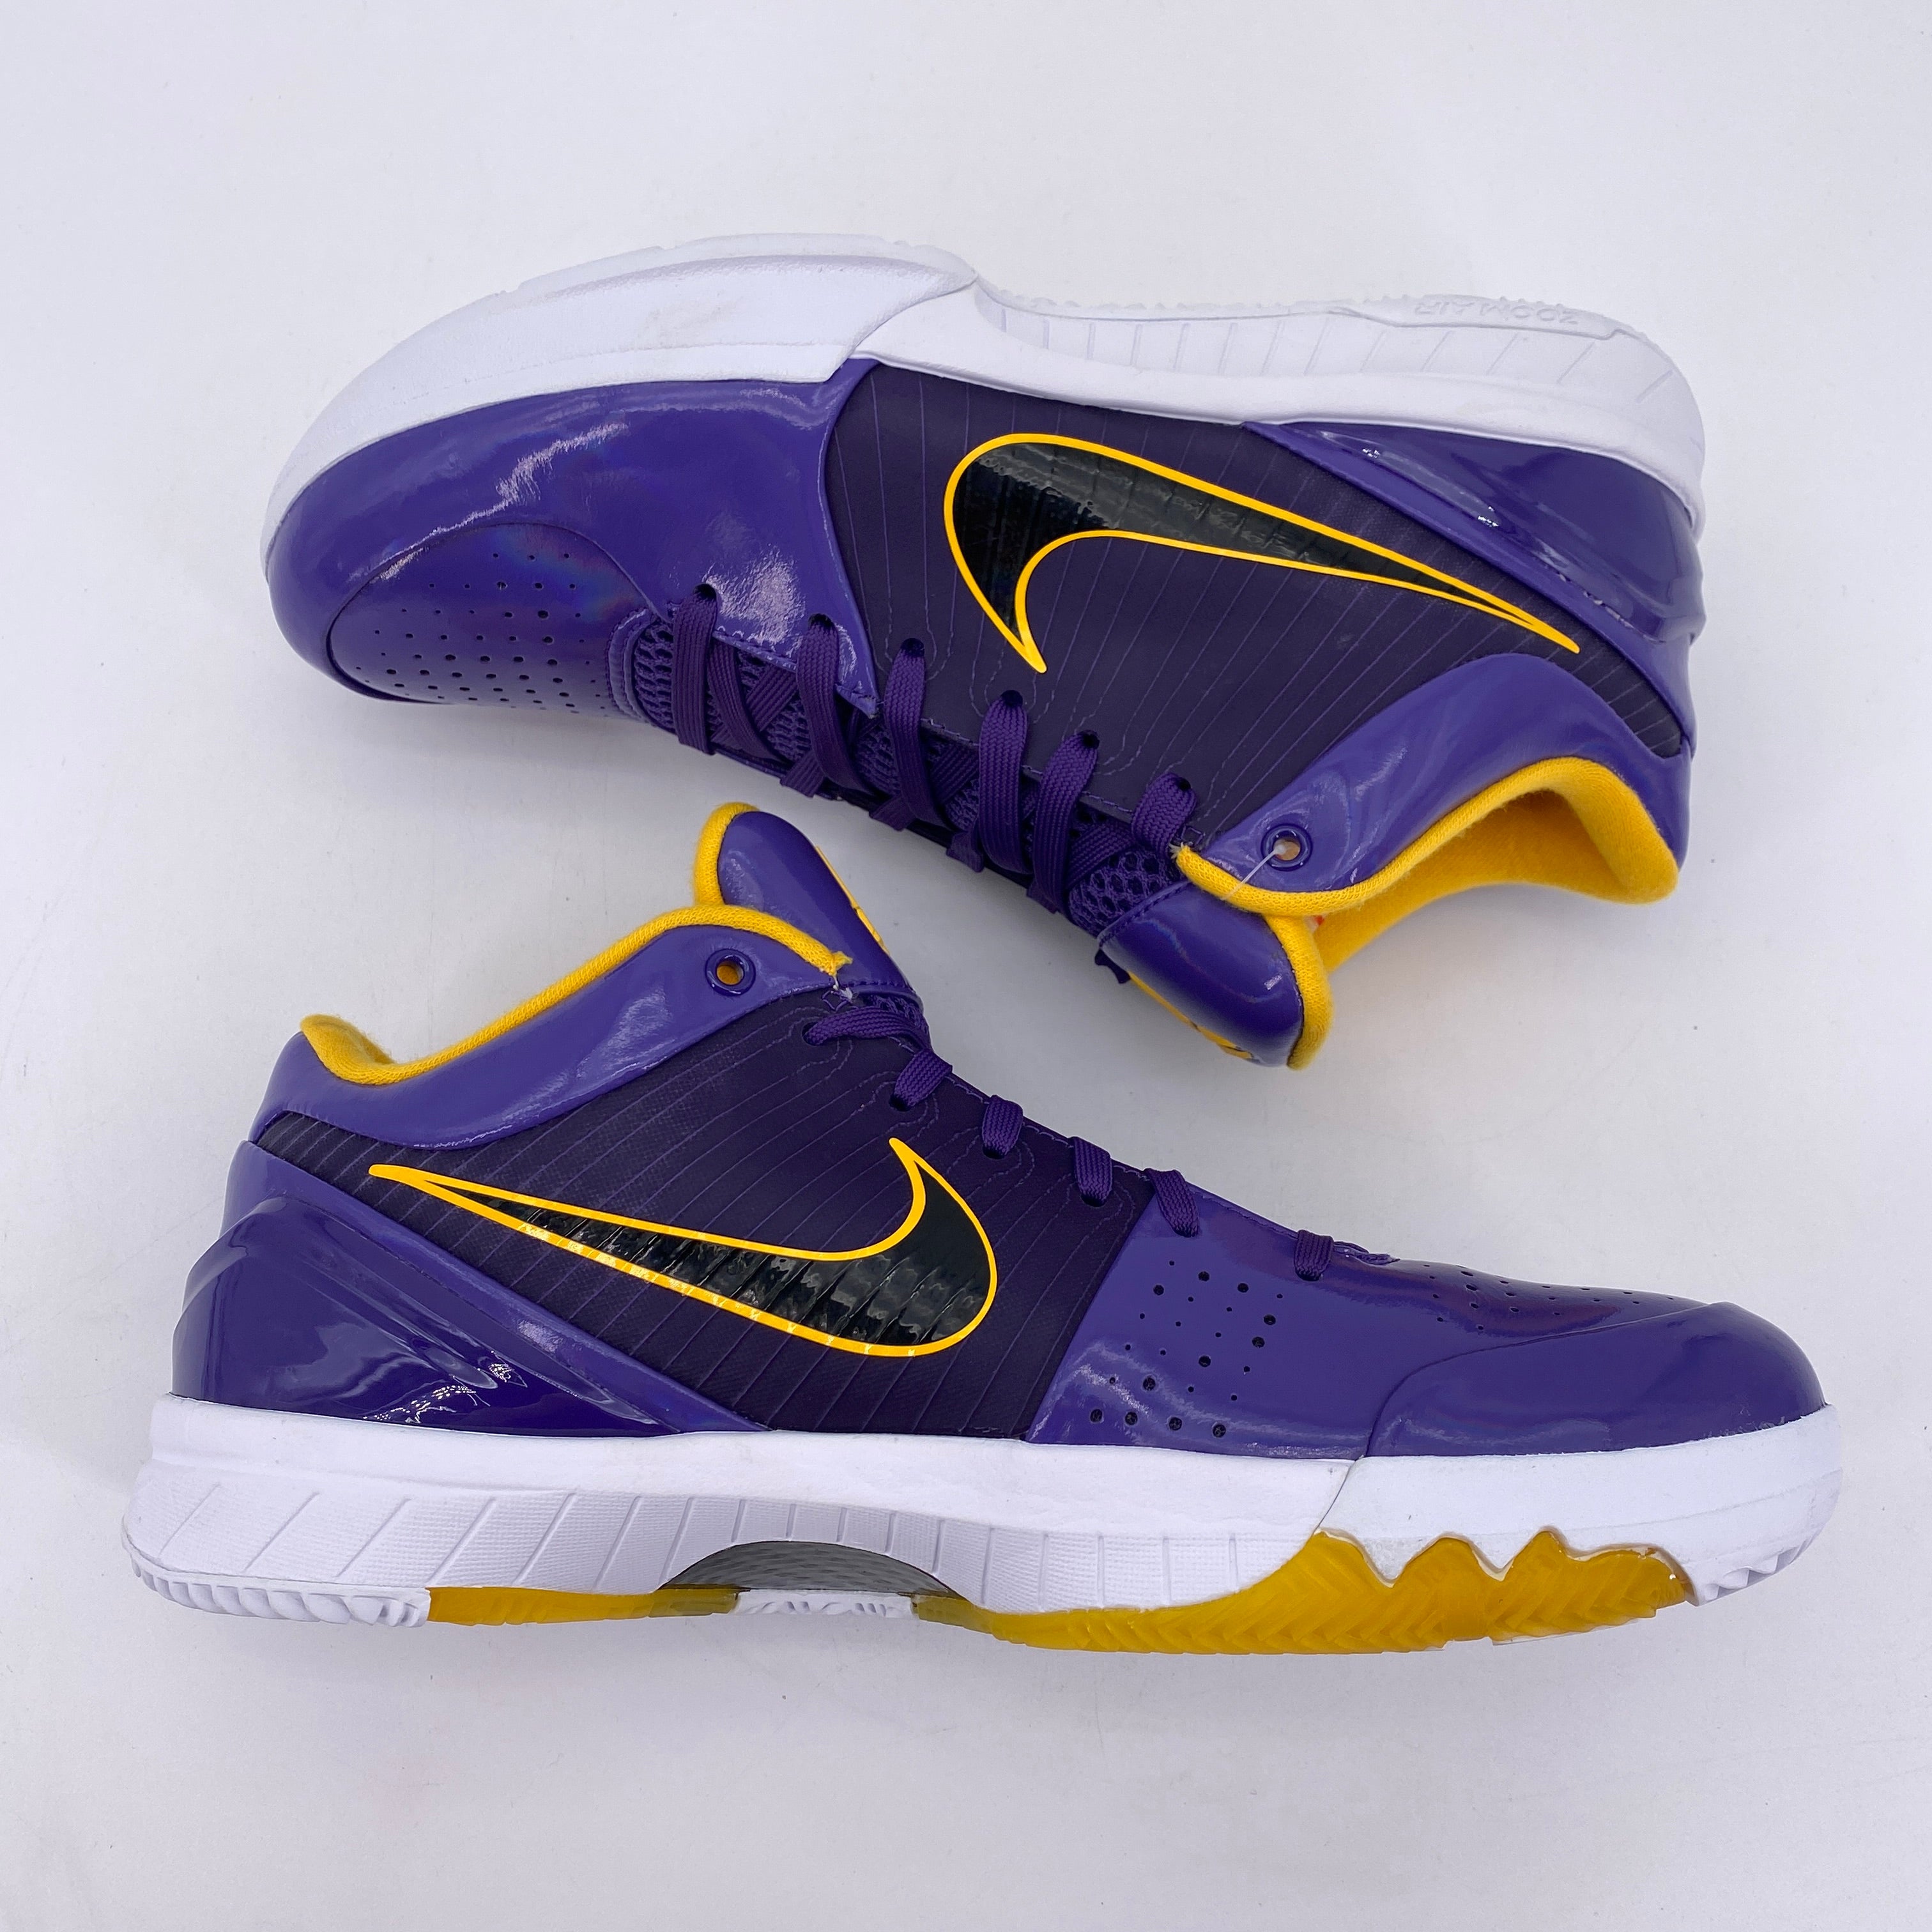 Nike Kobe 4 Protro &quot;Undftd Lakers&quot; 2019 New Size 10